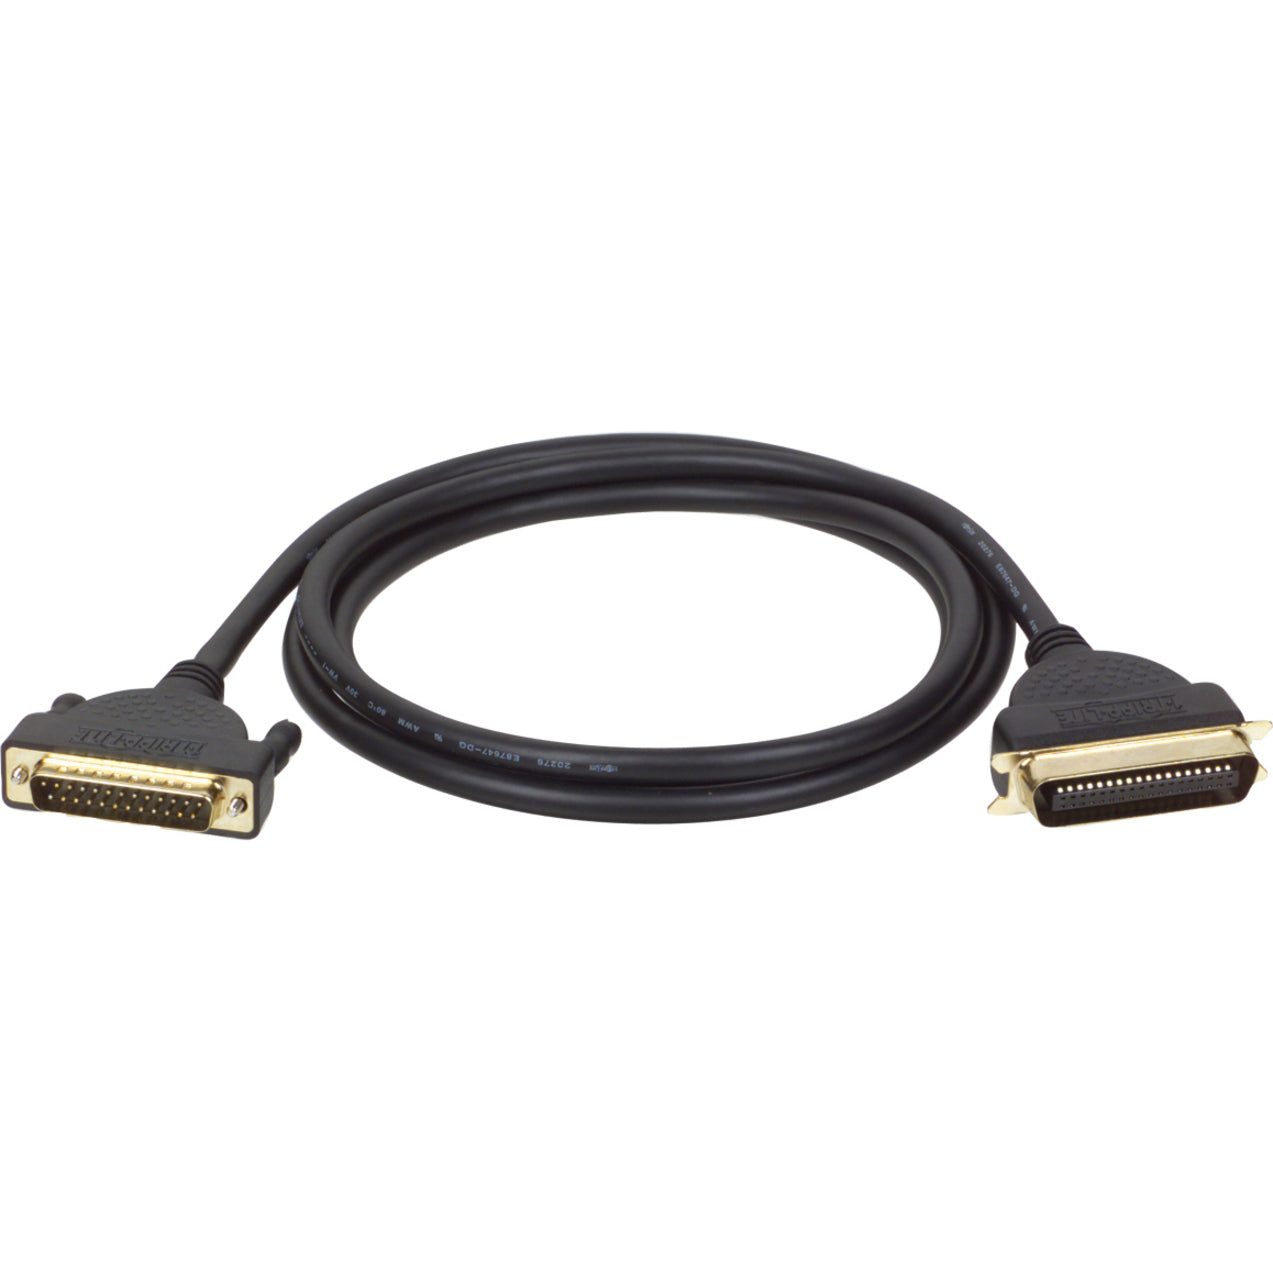 Tripp Lite P606-006 Printer Parallel Cable Adapter, 6-ft. Gold Cable for Printer Communication